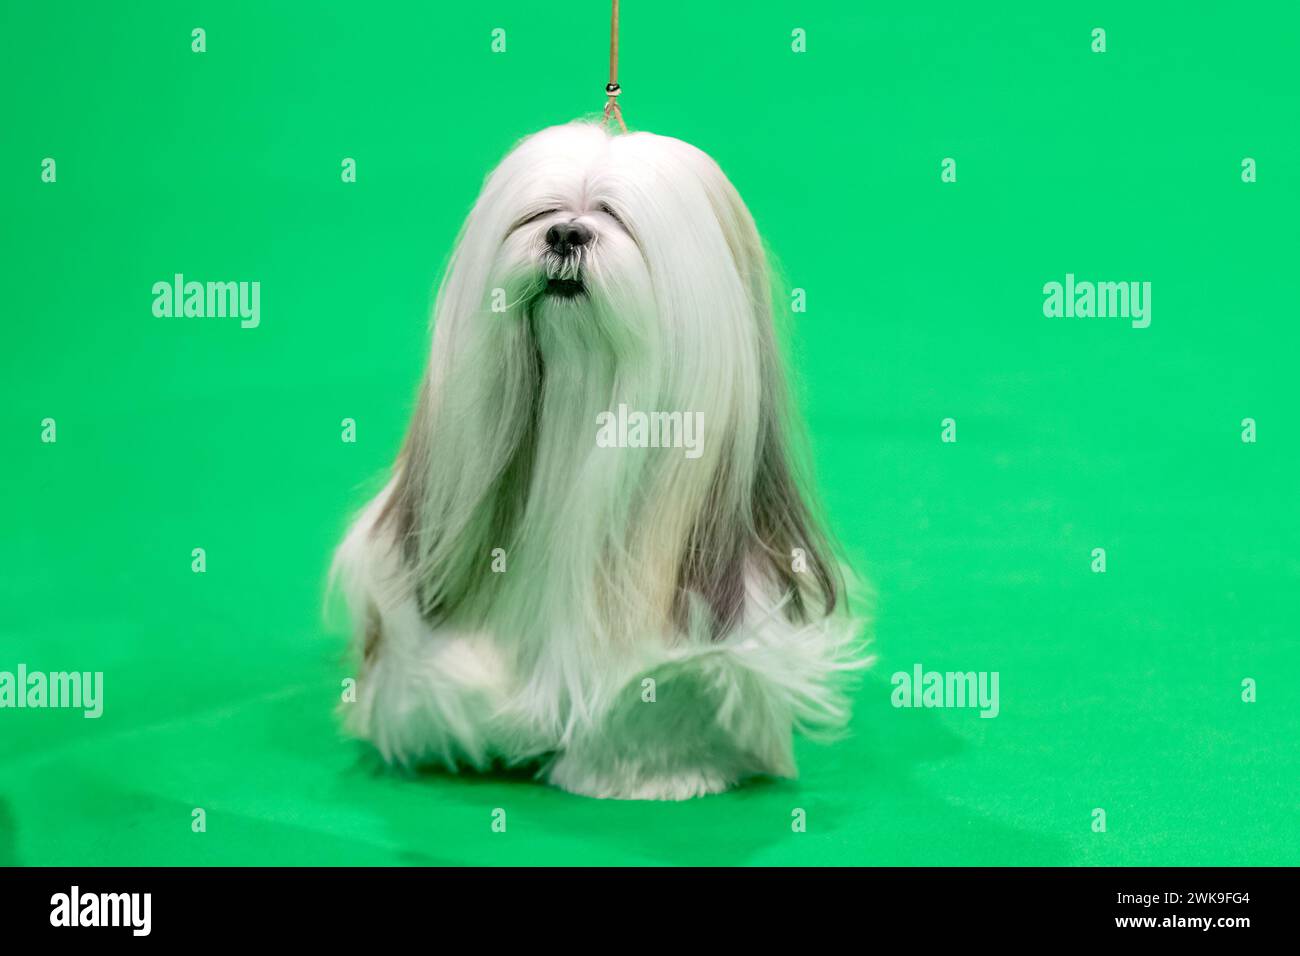 Long haired Lhasa Apso dog at a dog show Stock Photo